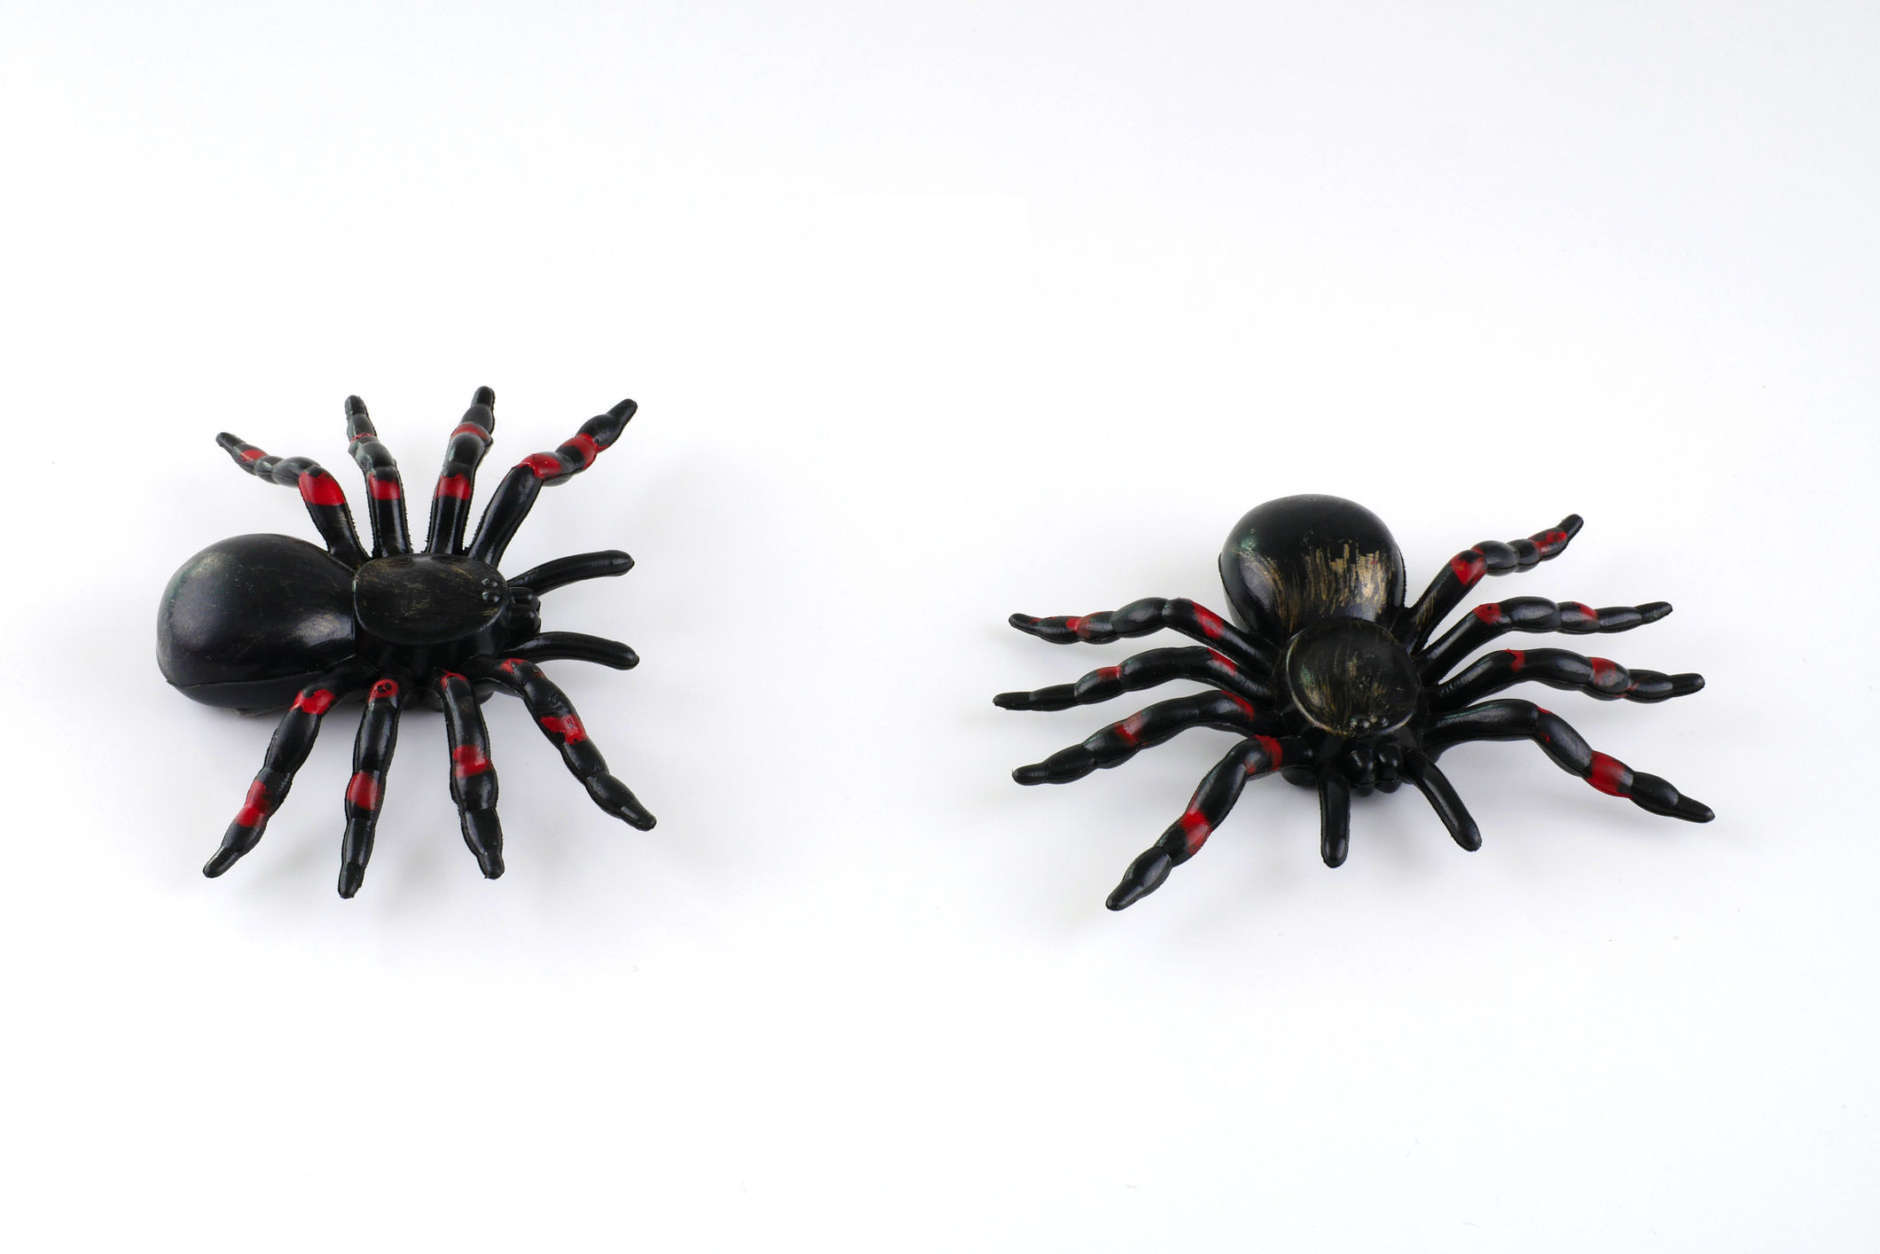 Two toy spider for halloween decoration isolated on white background